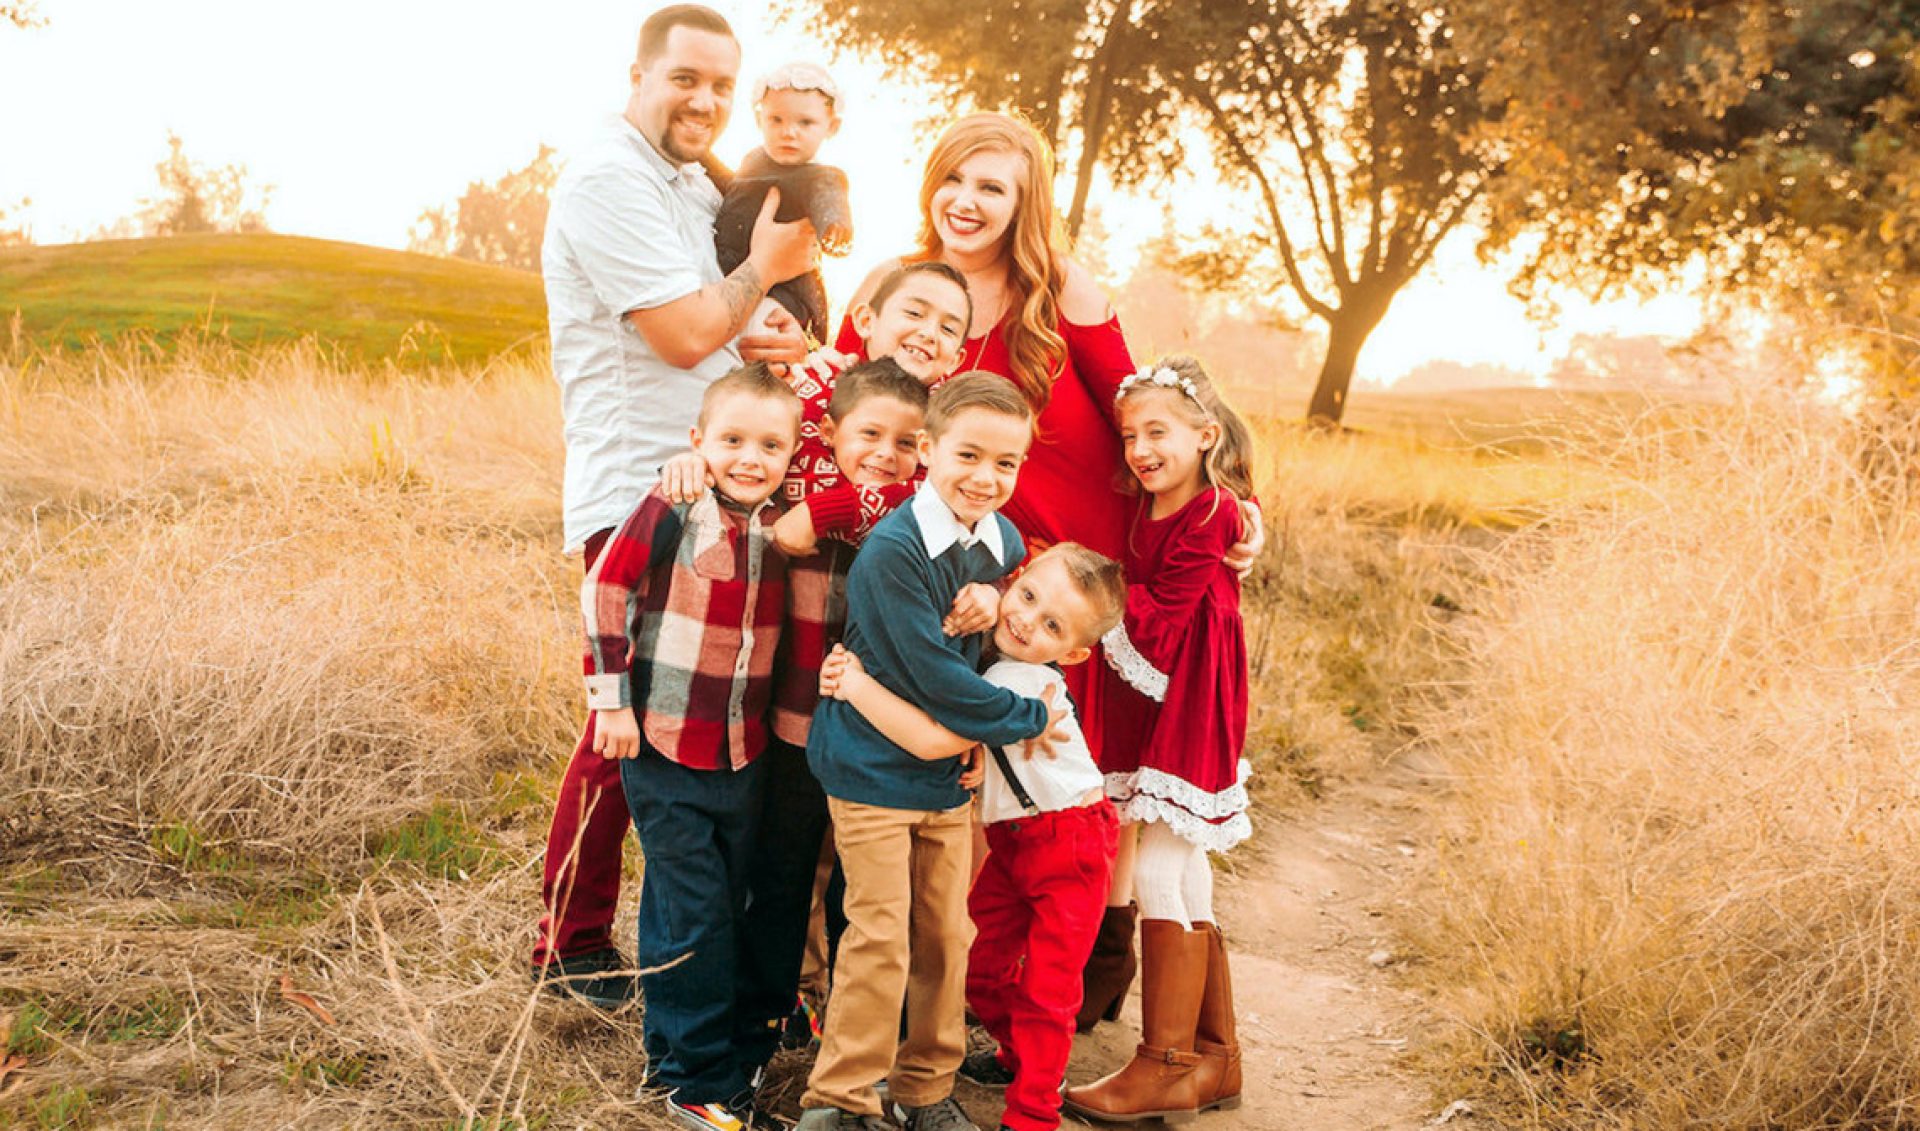 All In The Creator Family: JesssFam’s Blended Family Of 9 Is “Just The Right Mix Of Chaos And Love”